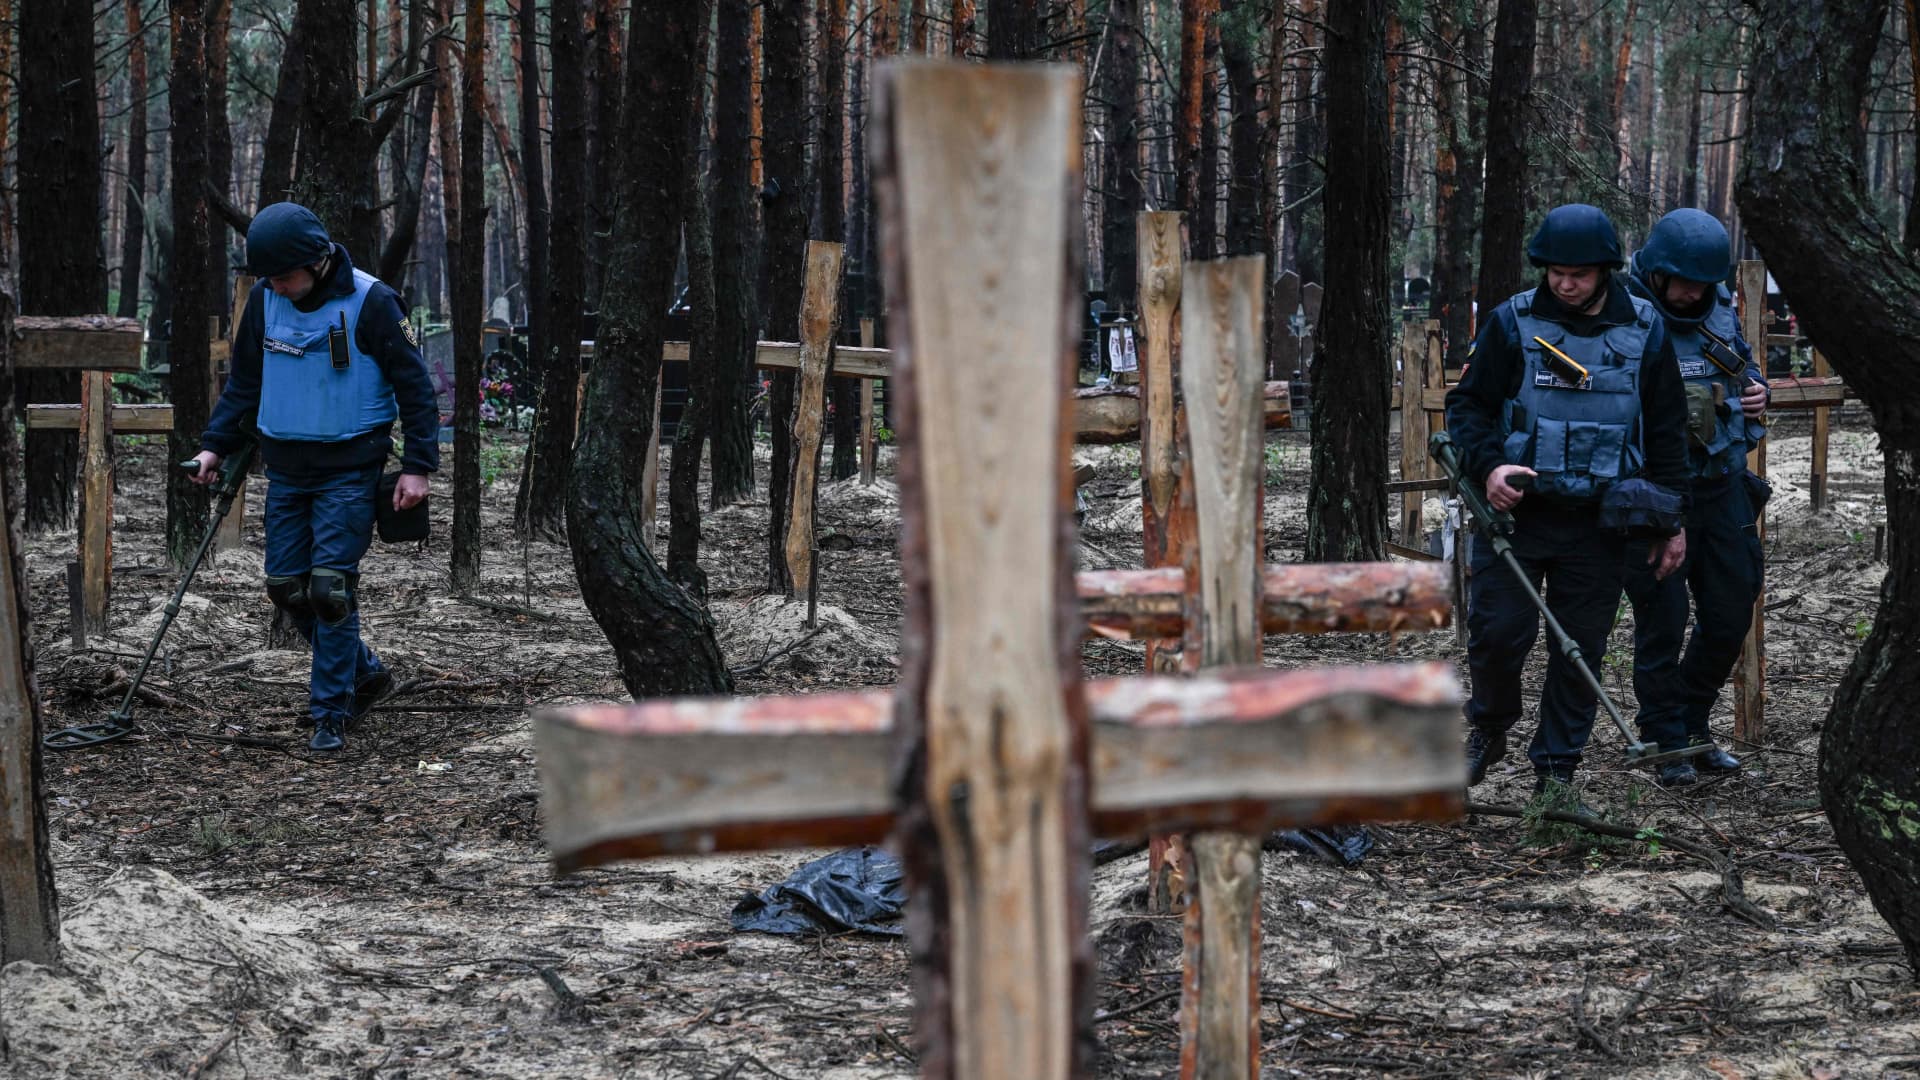 Ukrainian servicemen search for land mines at a burial site in a forest on the outskirts of Izyum, eastern Ukraine on September 16, 2022.